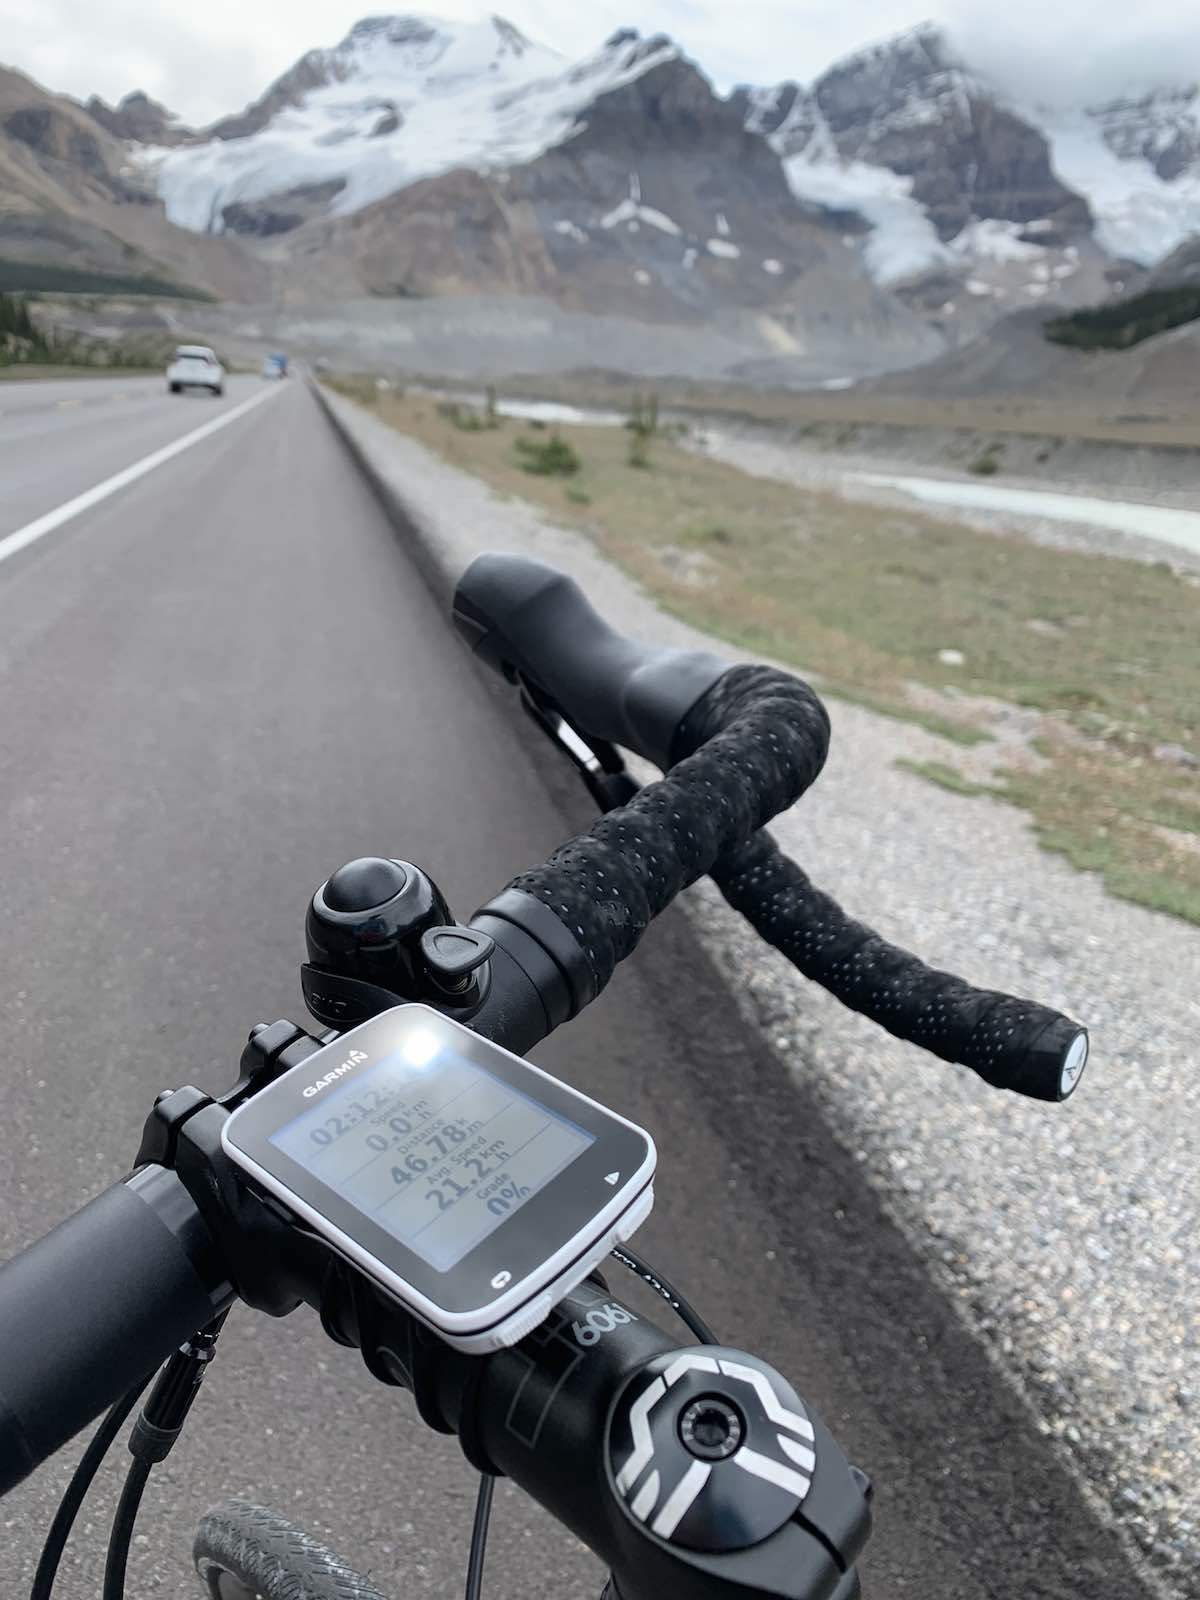 bikerumor pic of the day bike riding up to the columbia ice fields in banff and jasper national park.